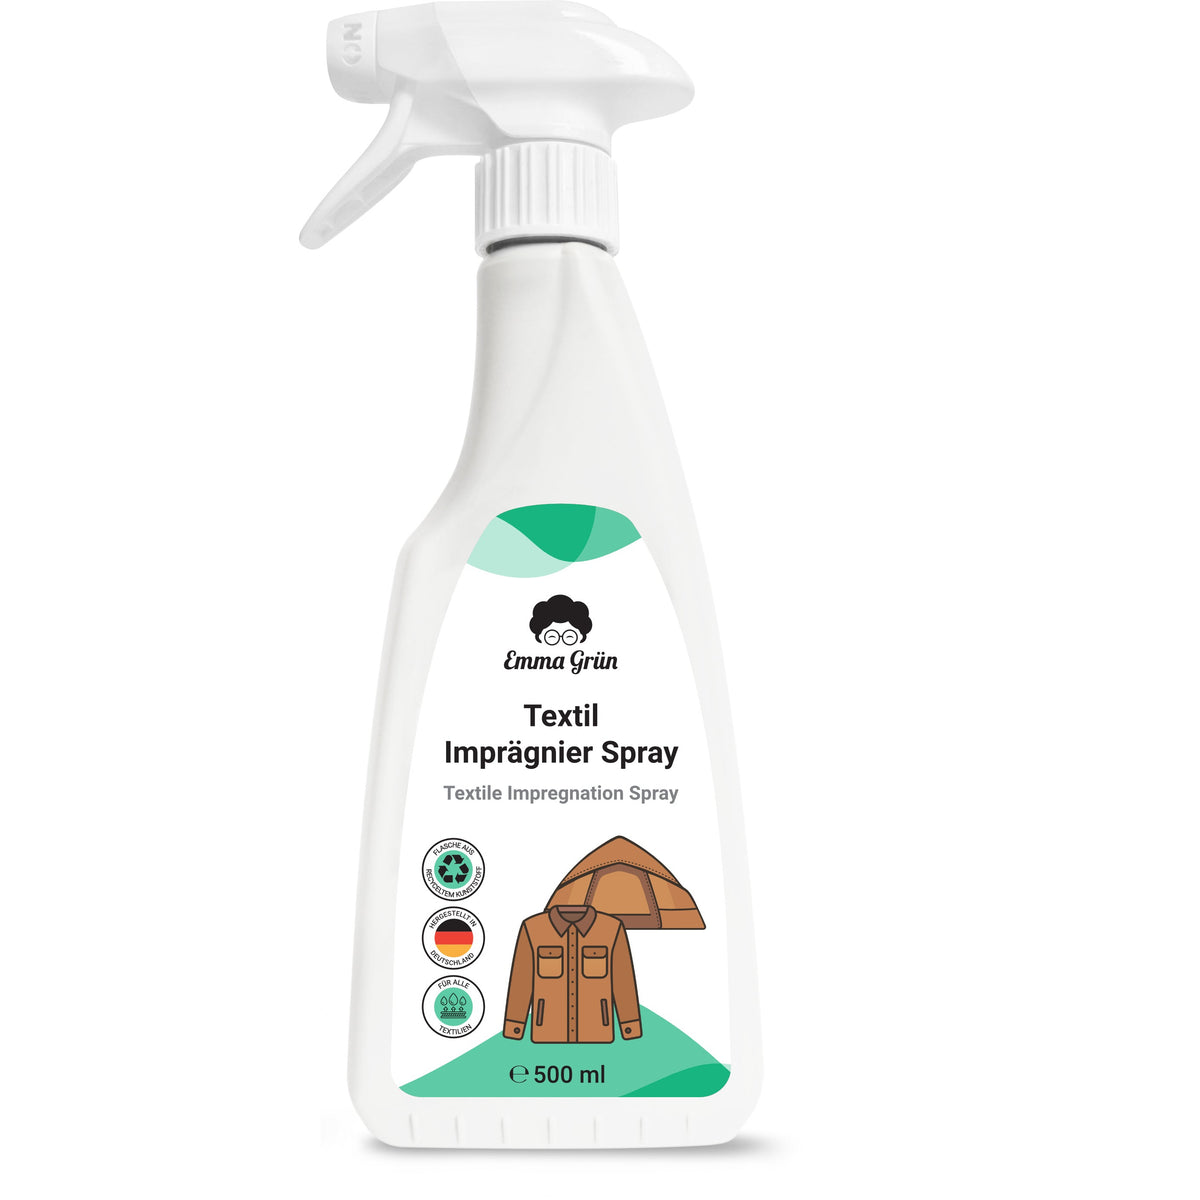 Upholstery cleaner 500 ml for removing stains and odors from